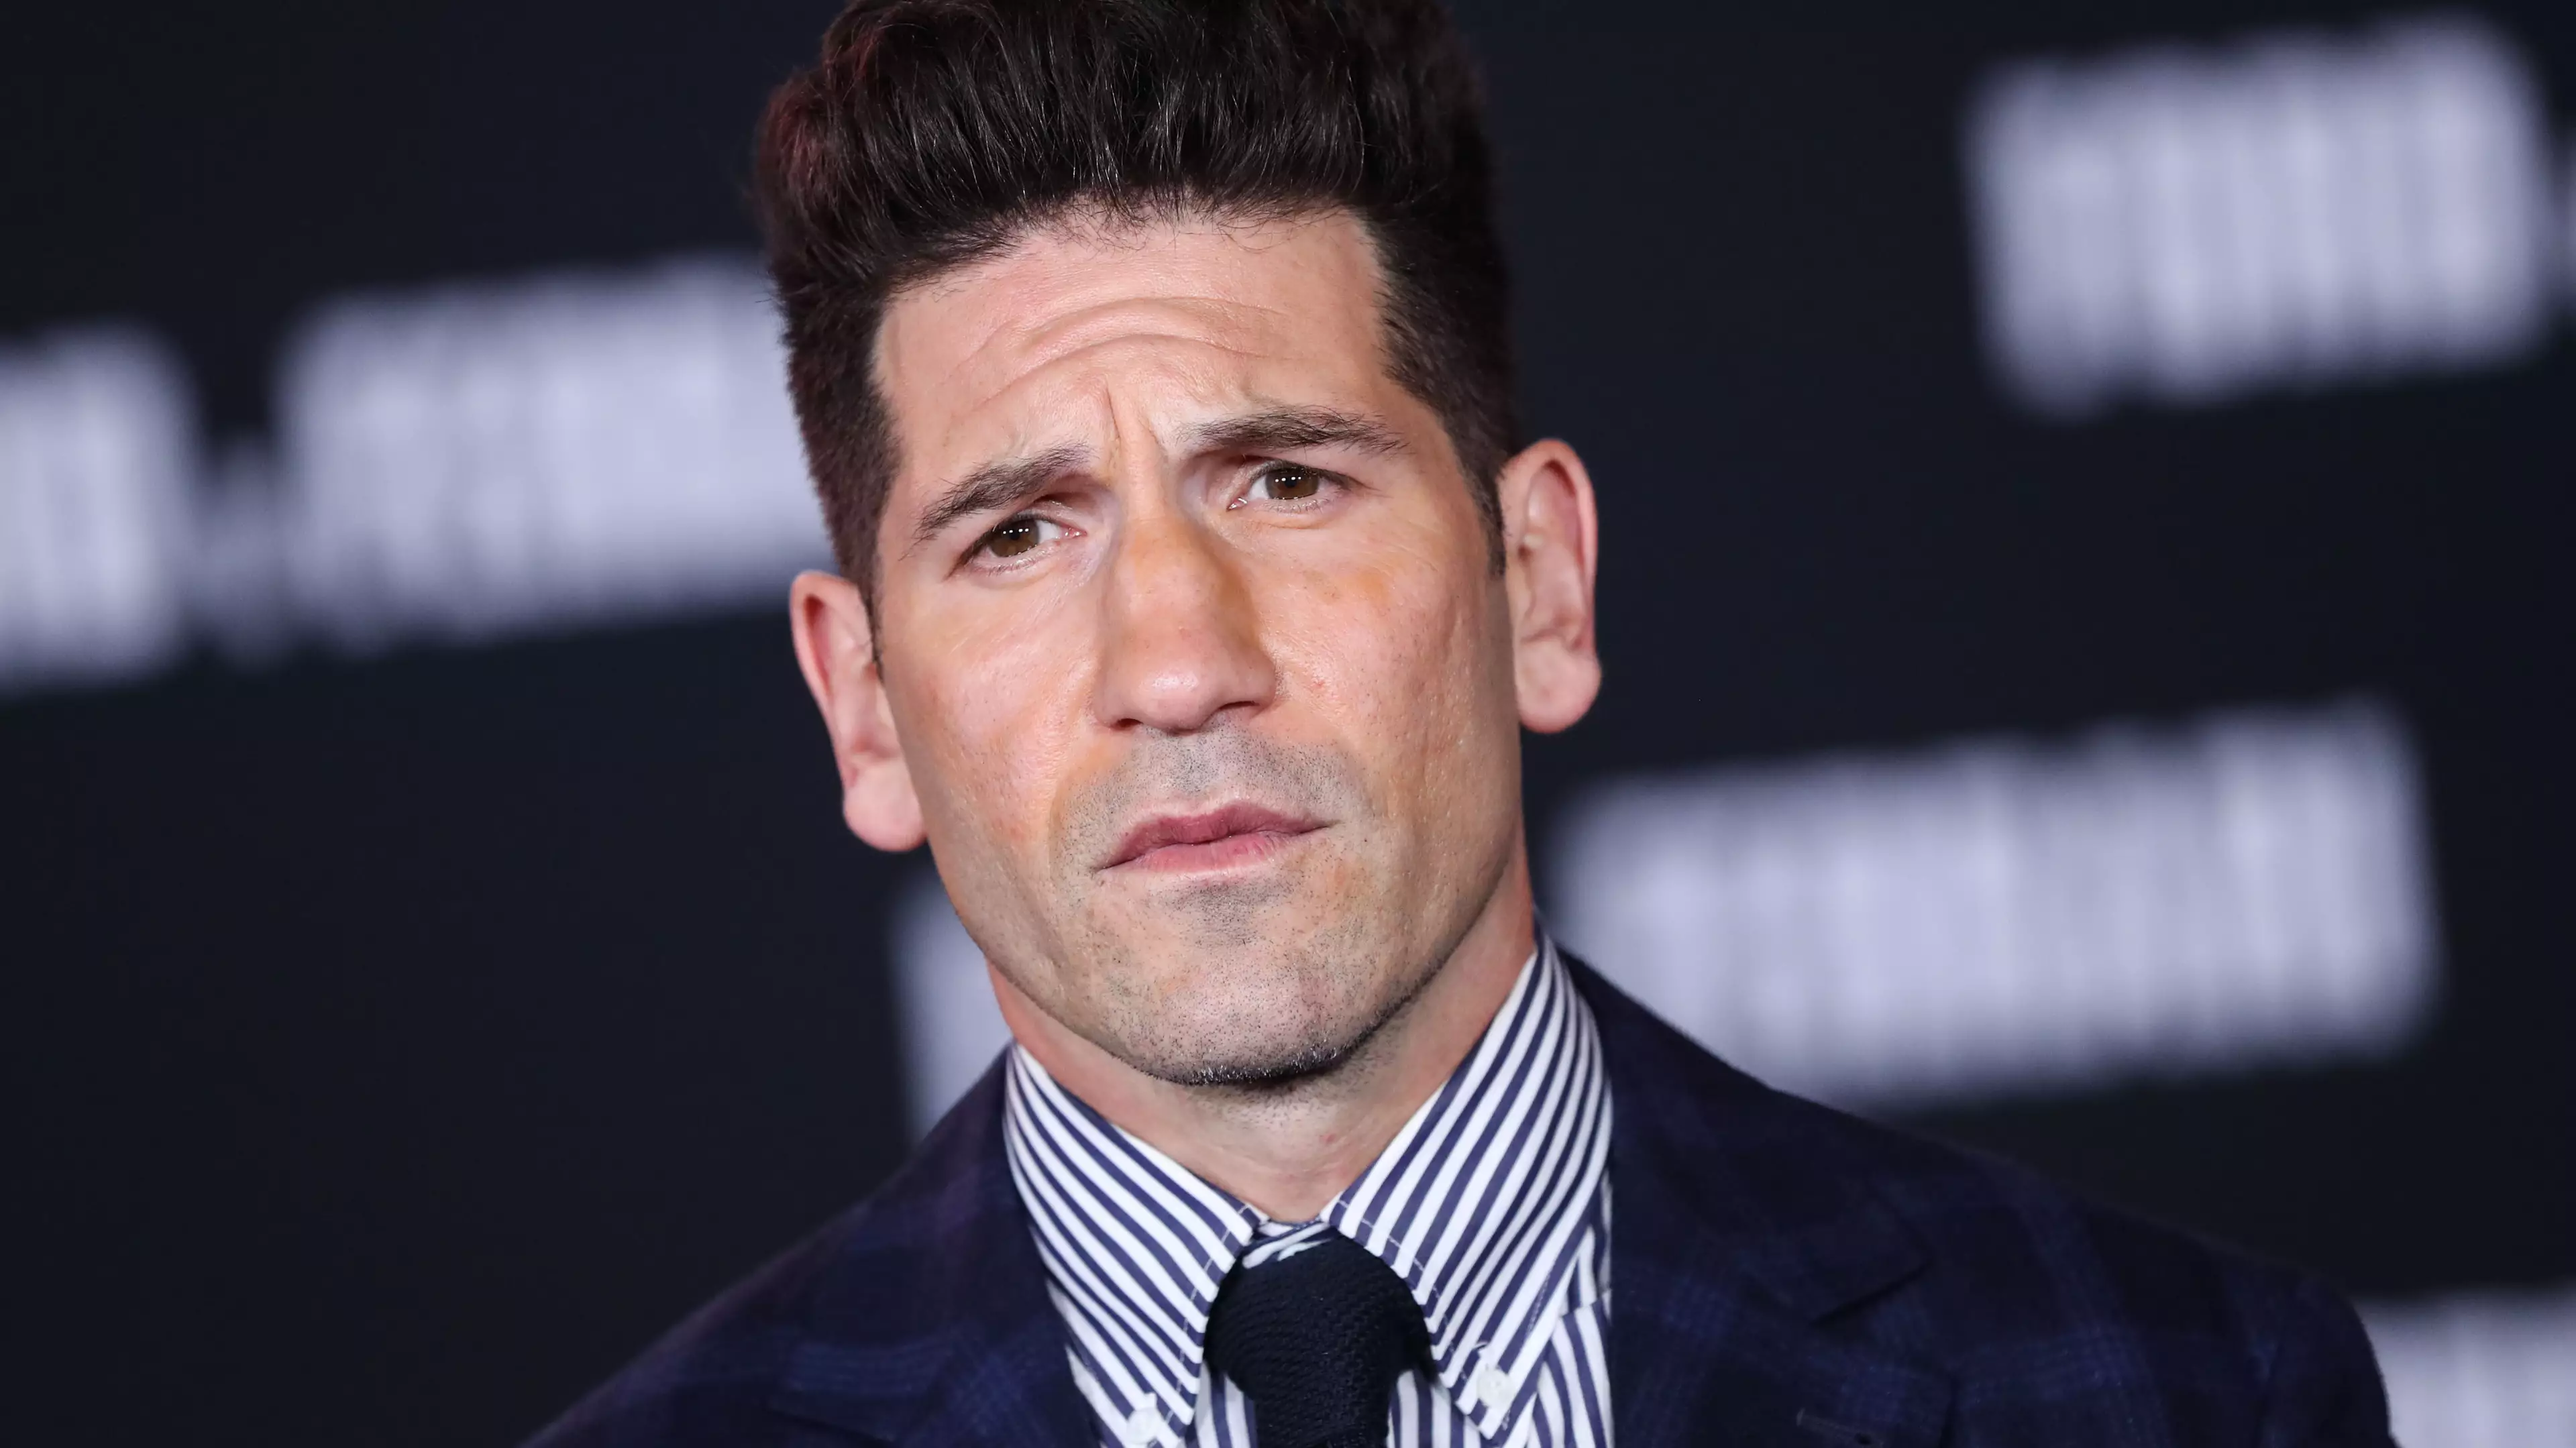 John Bernthal Went Full Method Actor For The Punisher Role